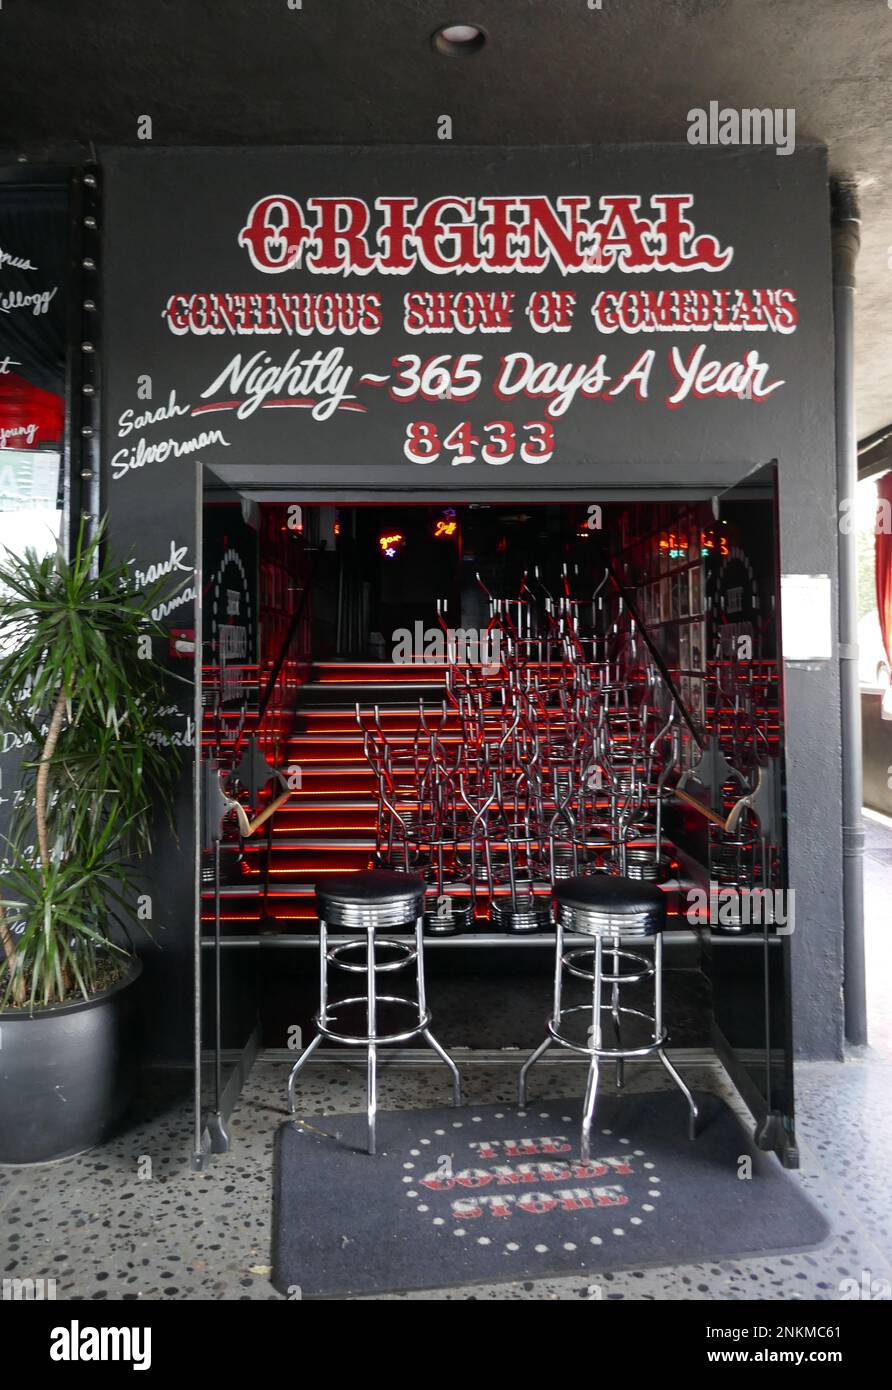 West Hollywood, California, USA 22nd February 2023 The Comedy Store on Sunset Blvd on February 22, 2023 in West Hollywood, California, USA. Photo by Barry King/Alamy Stock Photo Stock Photo